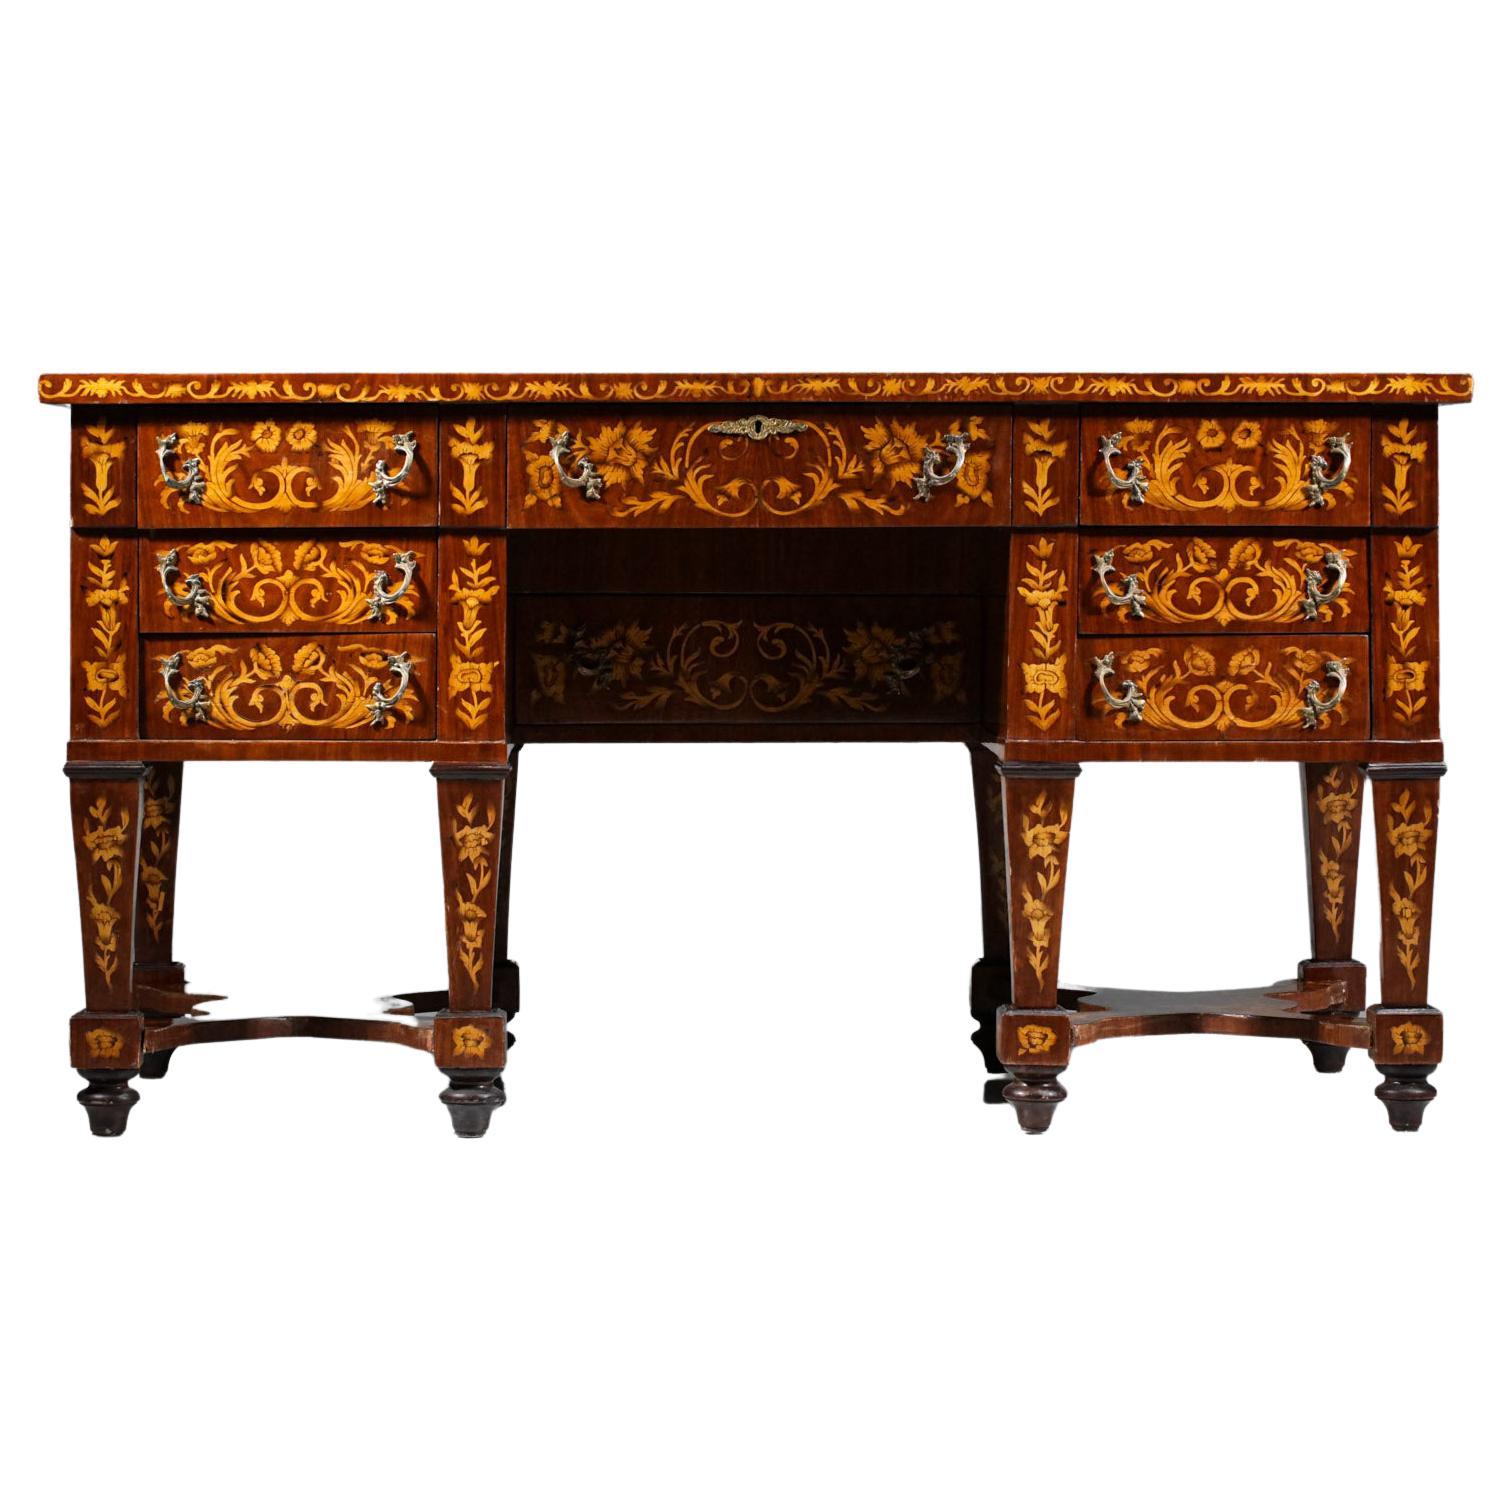 Italian desk in the Mazarin style of the XXI century. Solid wood and veneer structure, gilded metal handles and brown leatherette desk pad. The desk is entirely covered with marquetry with very decorative floral motifs and has a total of 7 drawers.